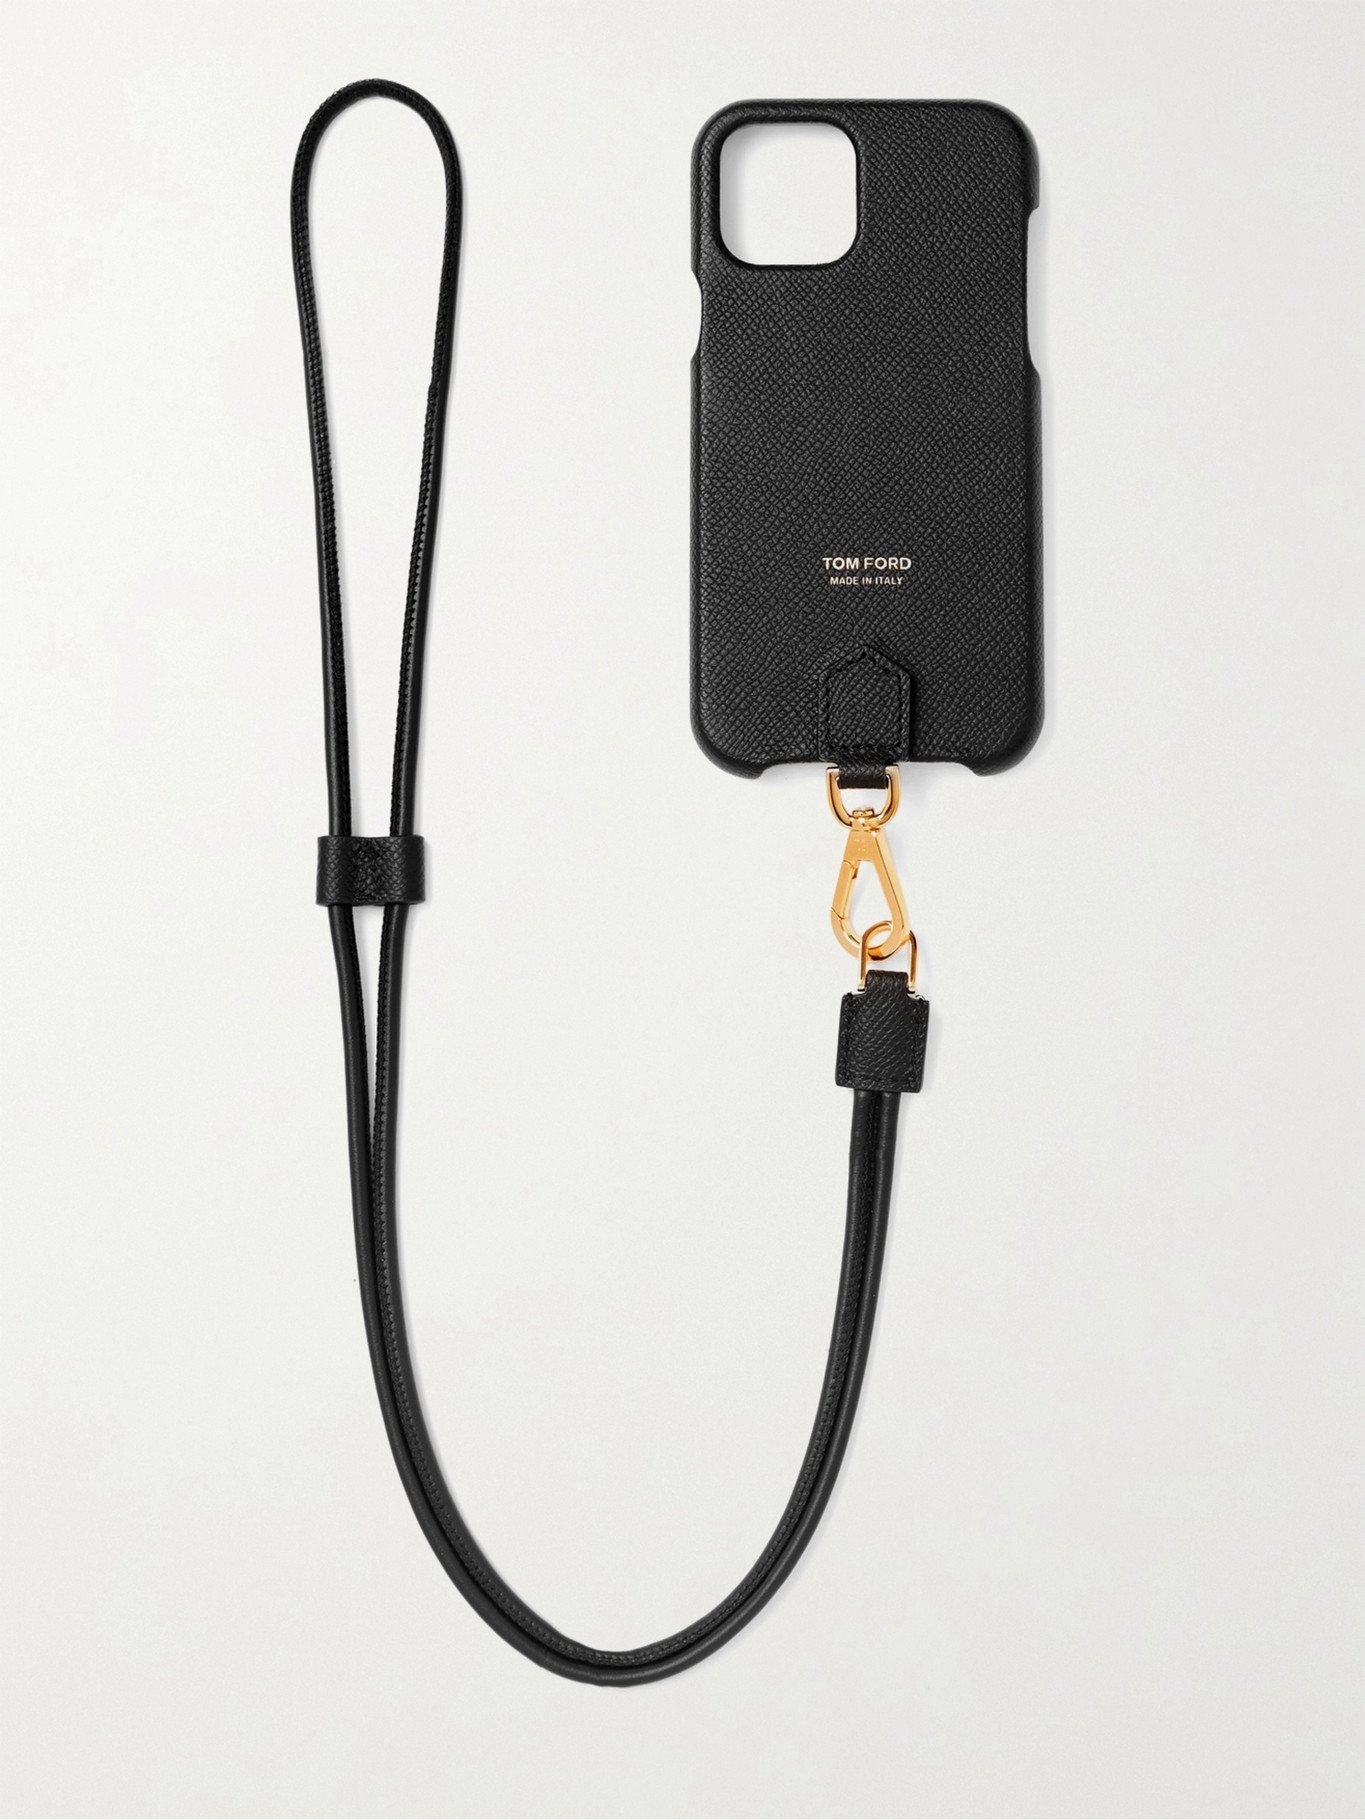 TOM FORD - Logo-Print Full-Grain Leather iPhone 11 Pro Case with Lanyard - Black TOM FORD